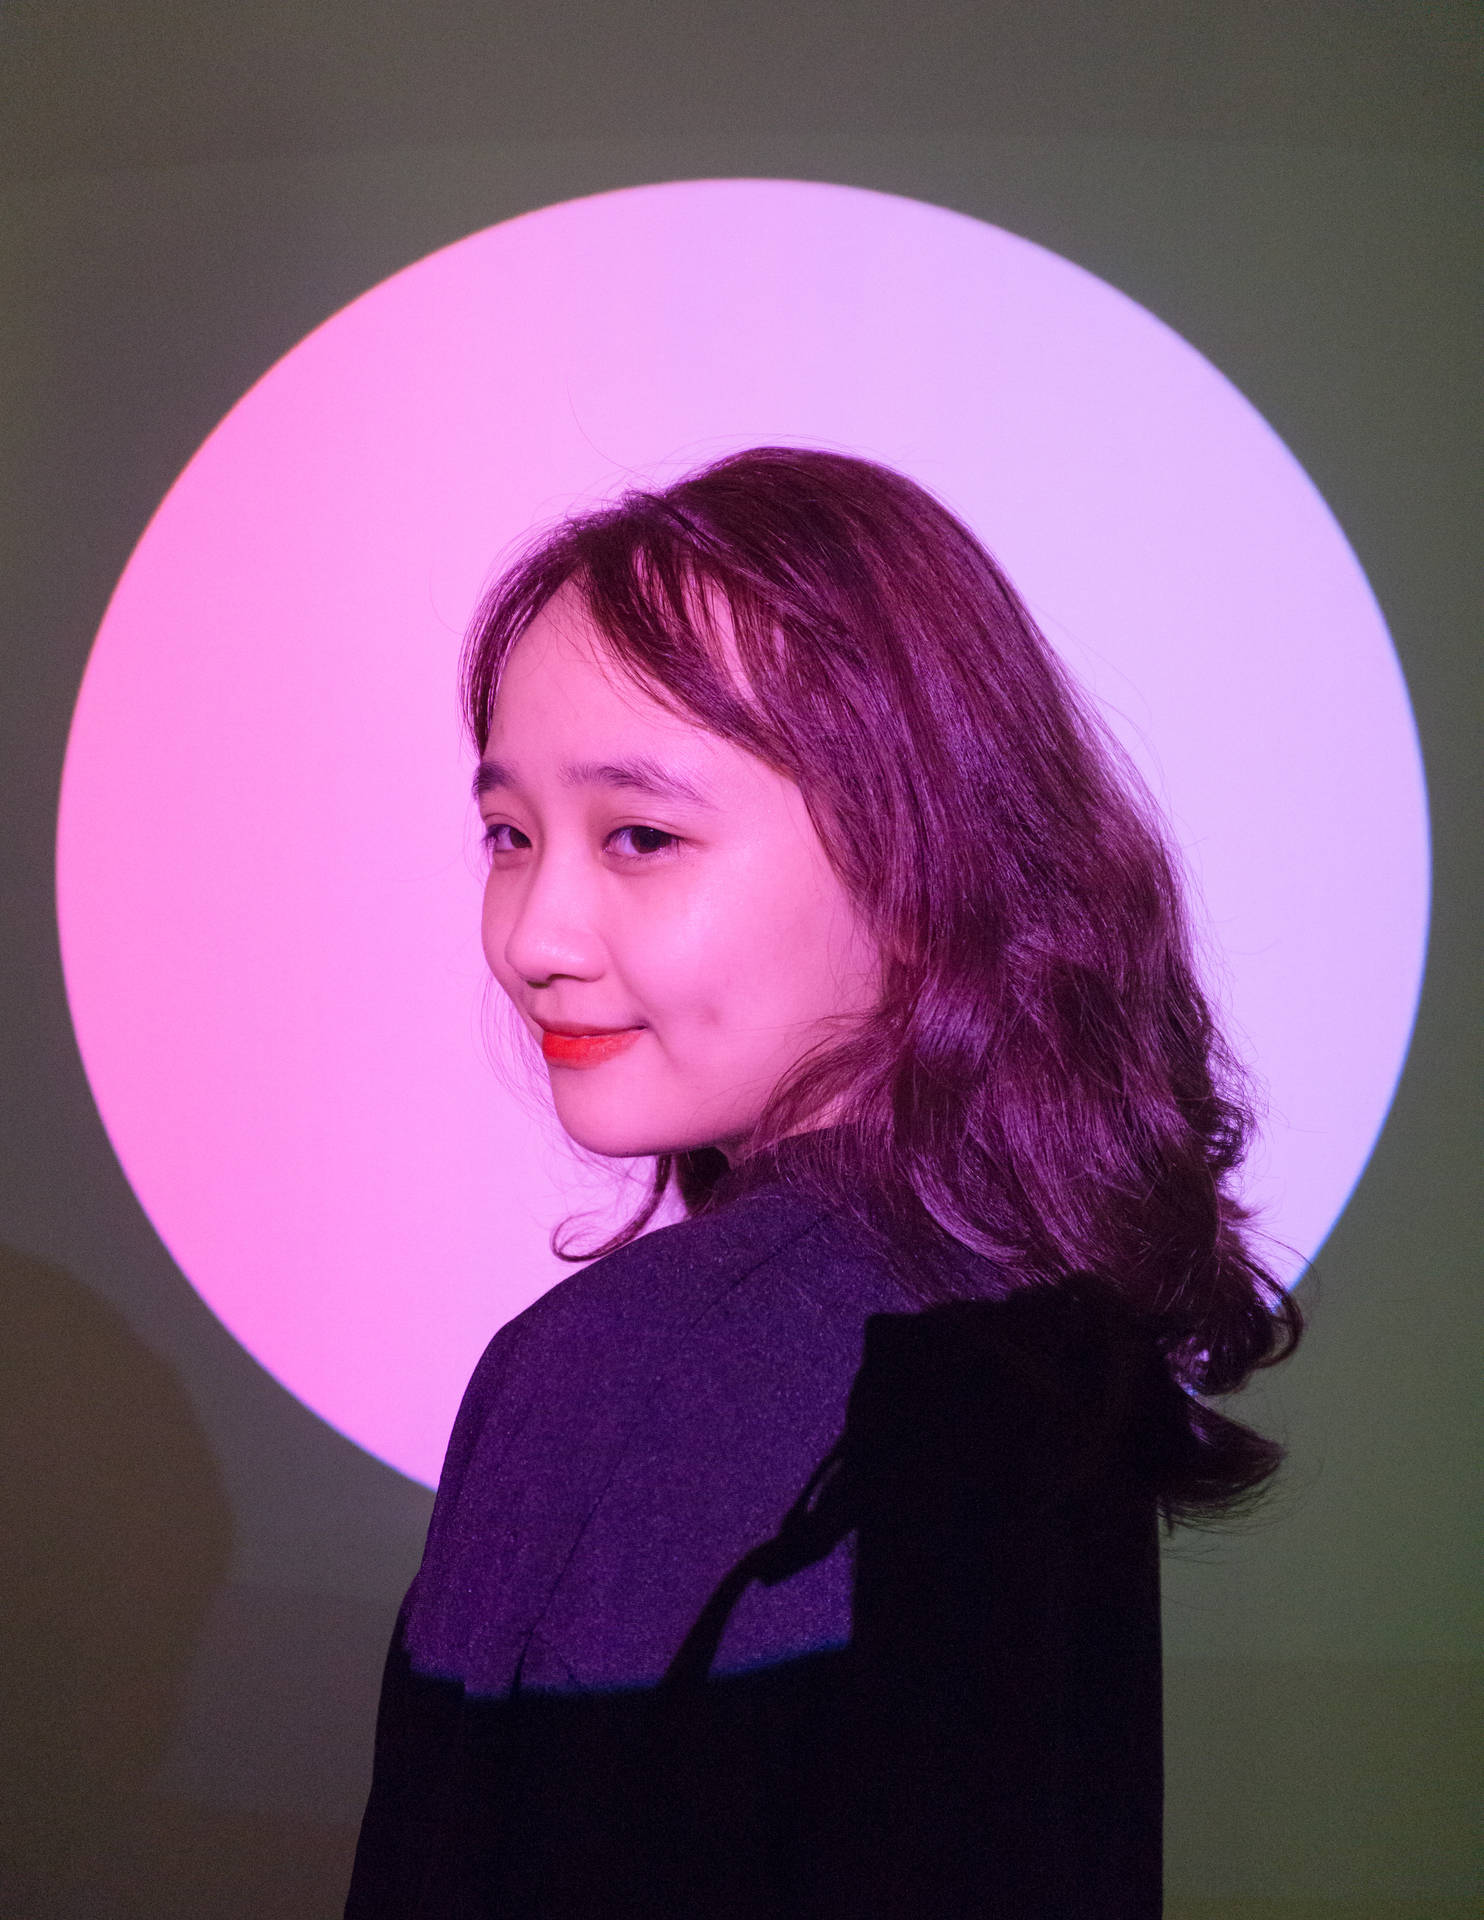 Cute Girl In Pink Light Background